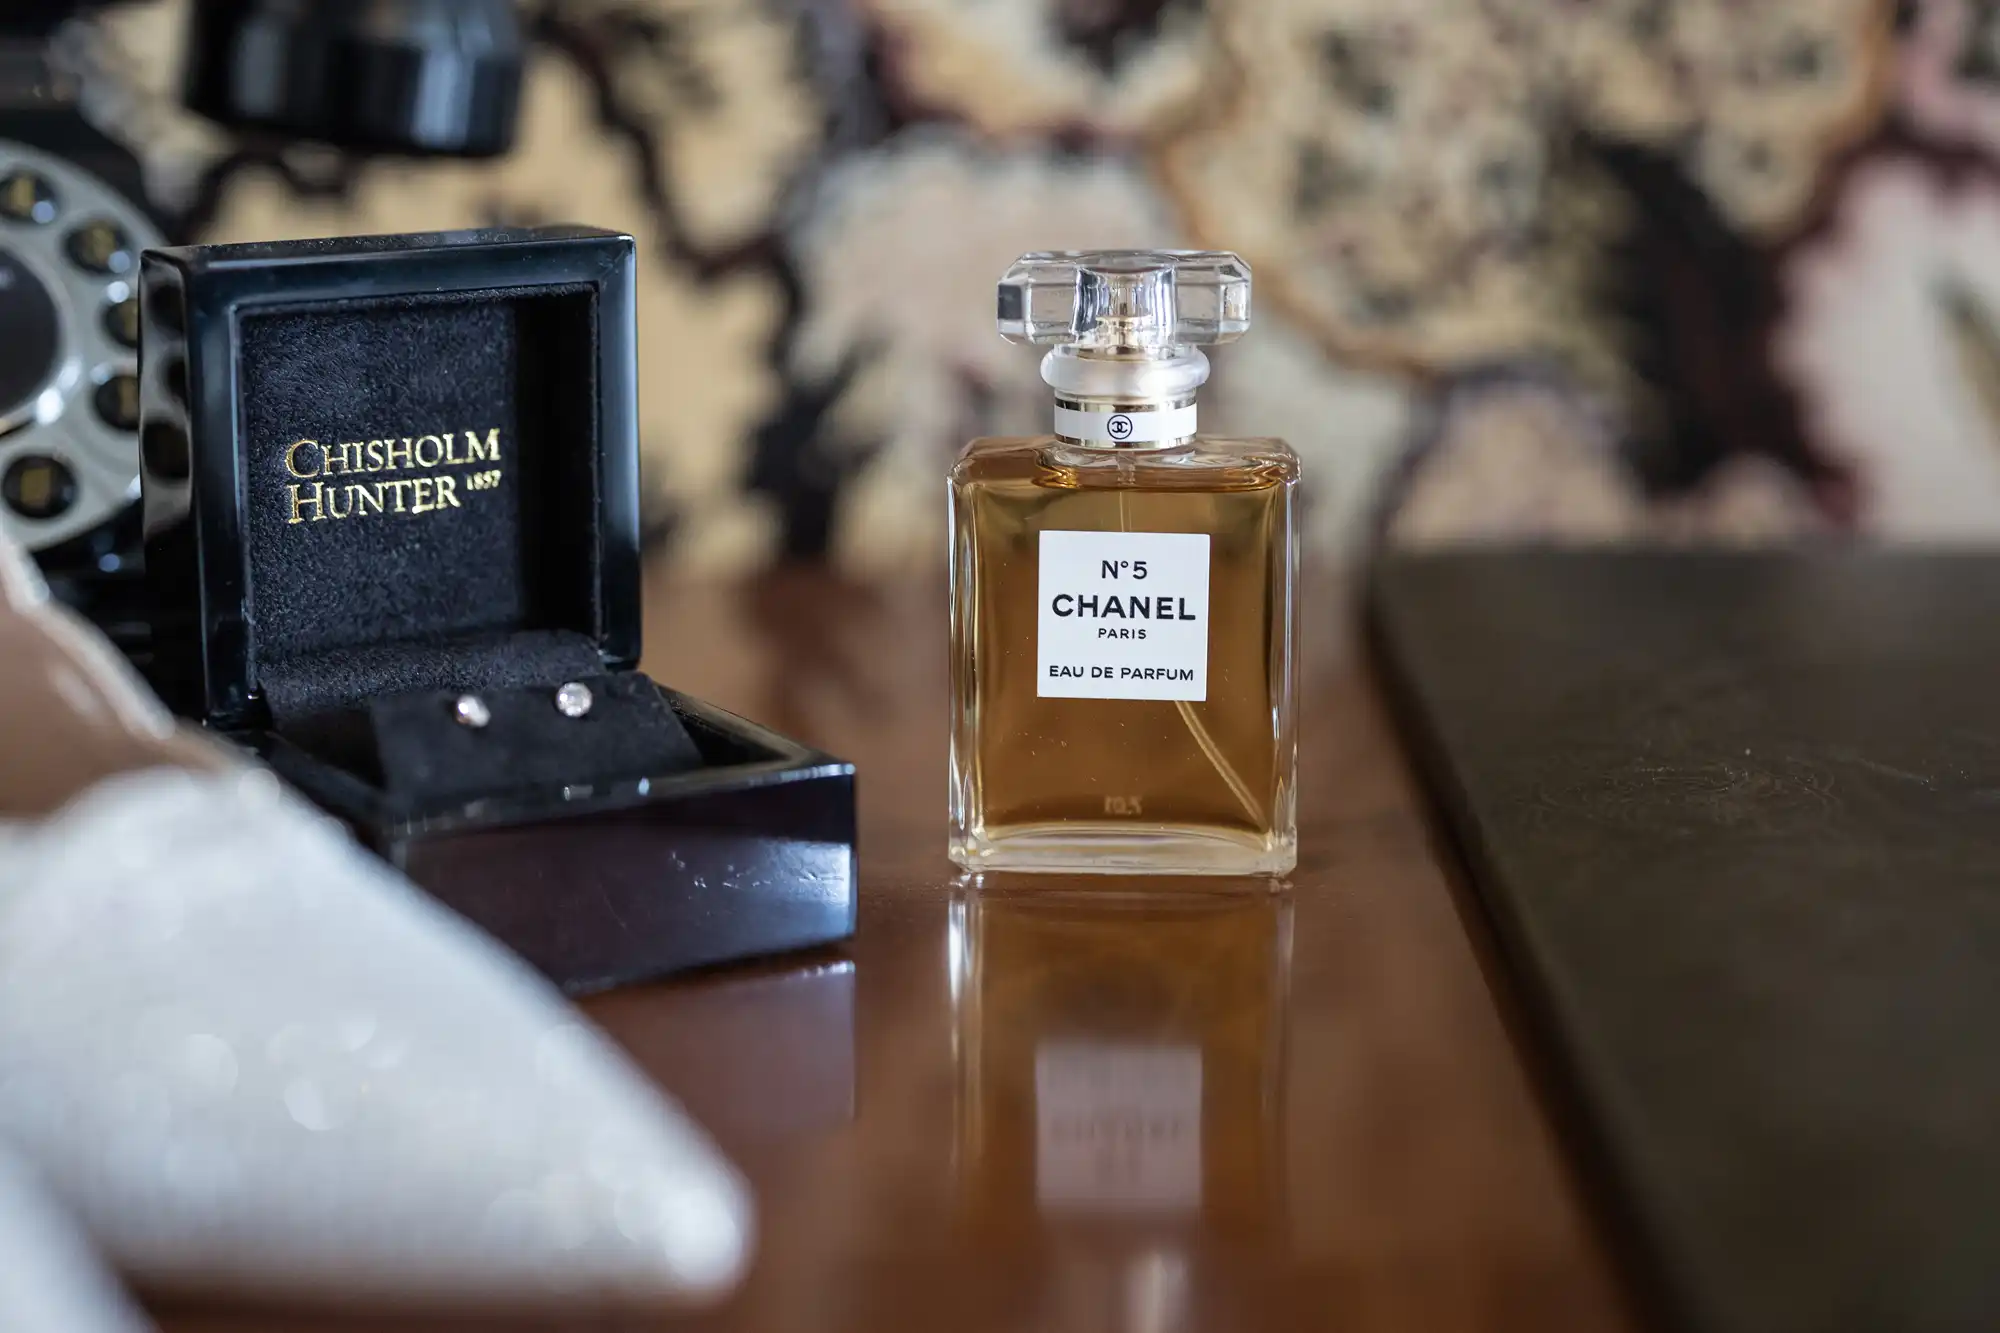 A bottle of Chanel No. 5 perfume on a table with a jewelry box and camera in the background.